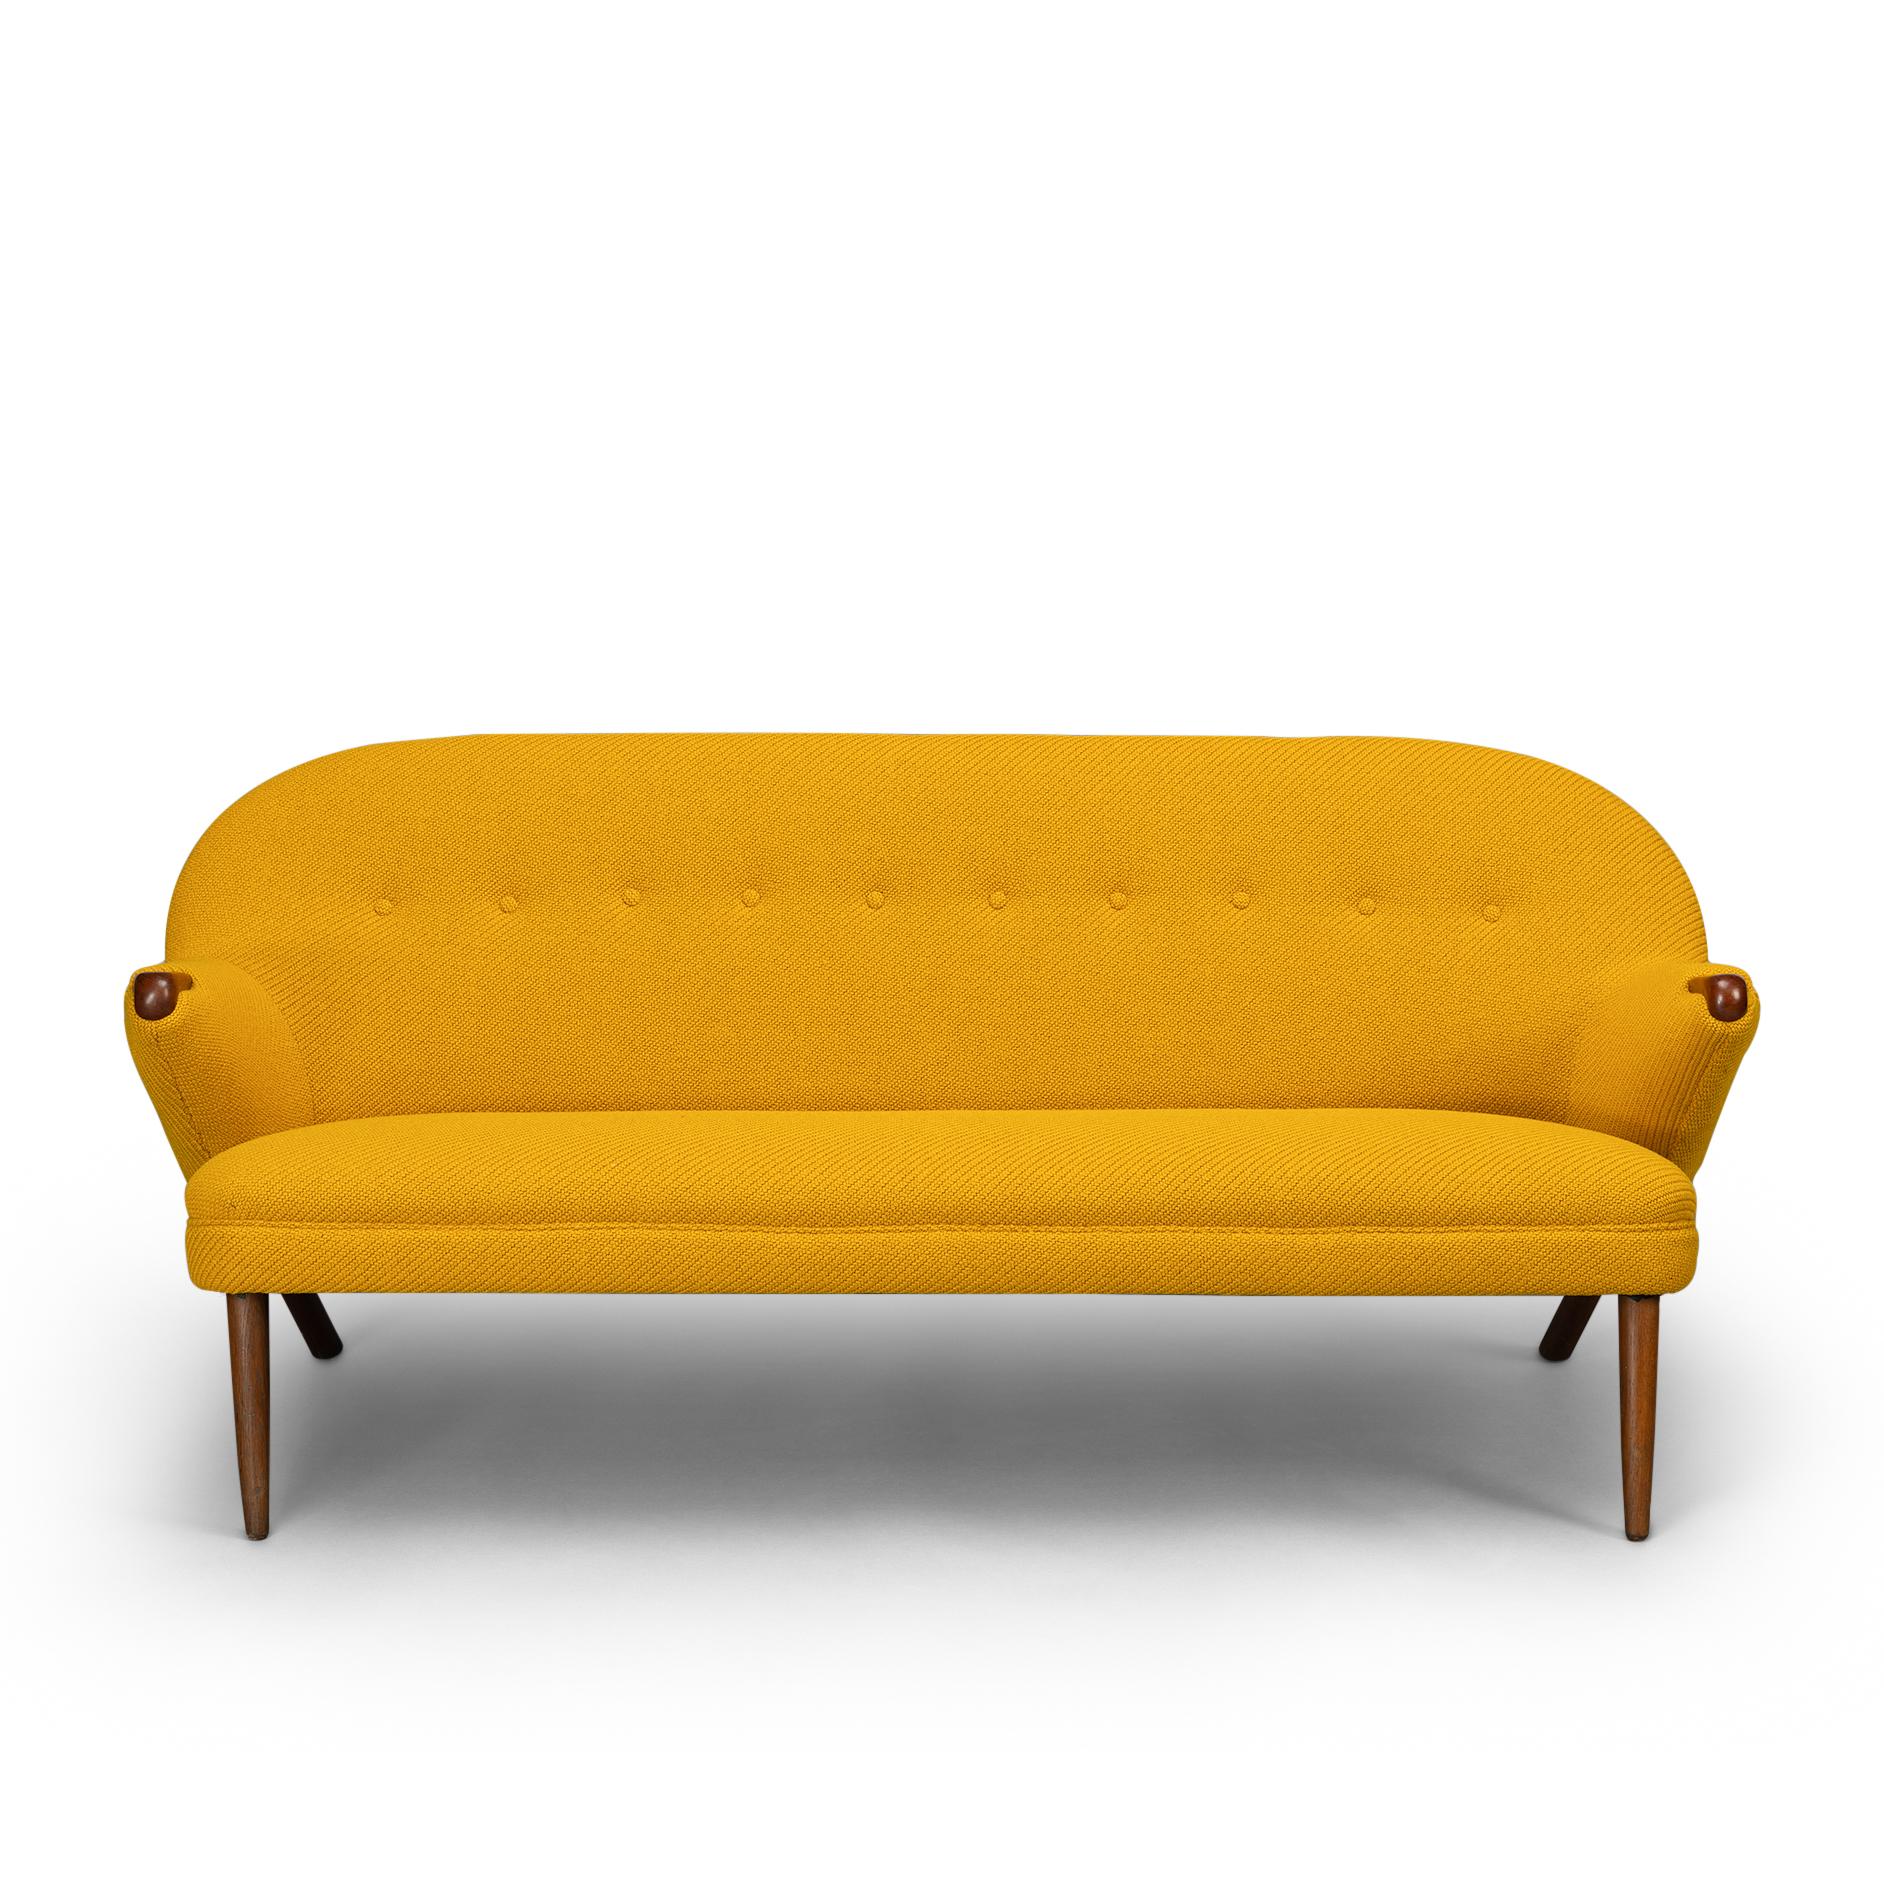 Edgy Johannes Andersen 2.5-seat sofa for CFC Silkeborg sofa in stunning new upholstery. The sofa has a super soft look with solid teak paws and legs. Springed seating is taken from the original design and the sofa is reupholstered with Kvadrat Coda